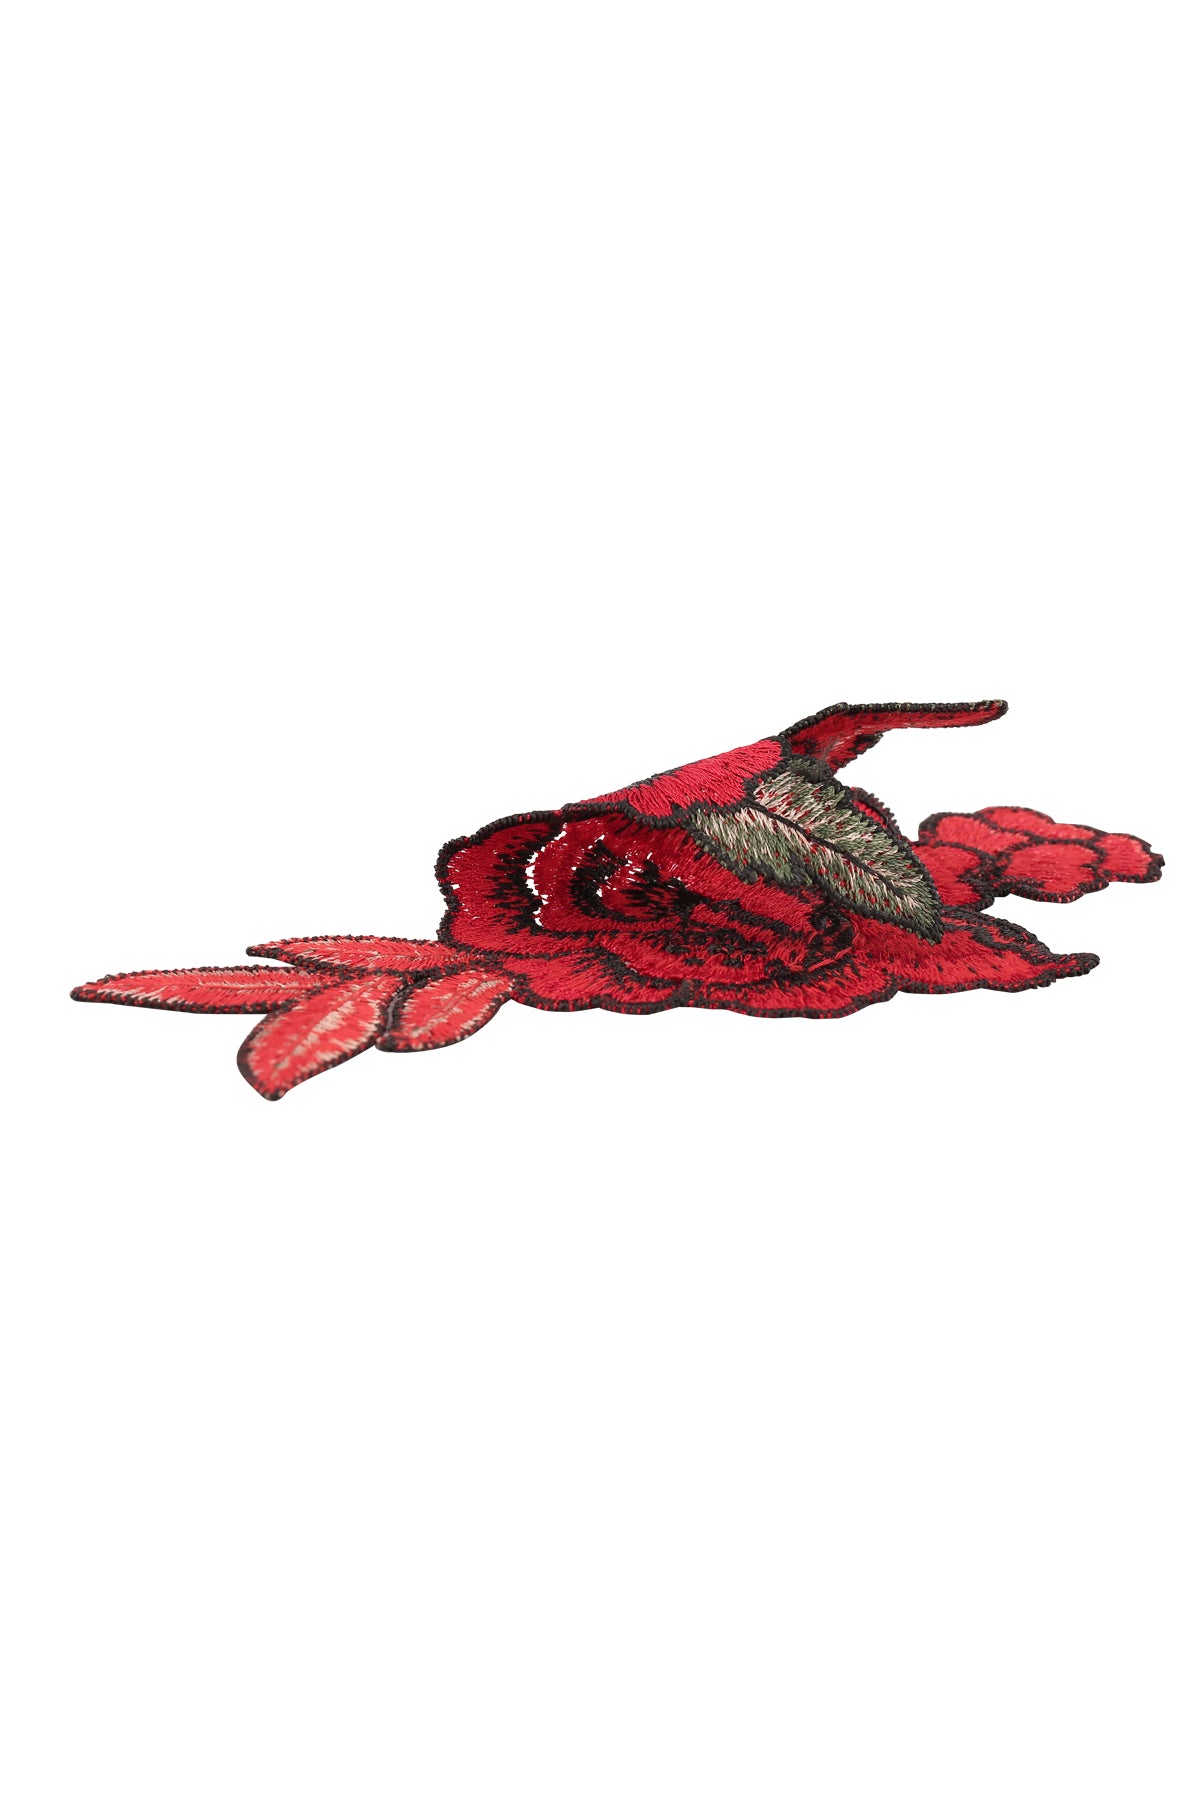 Pair of Small Red Rose Flower Embroidery Patch